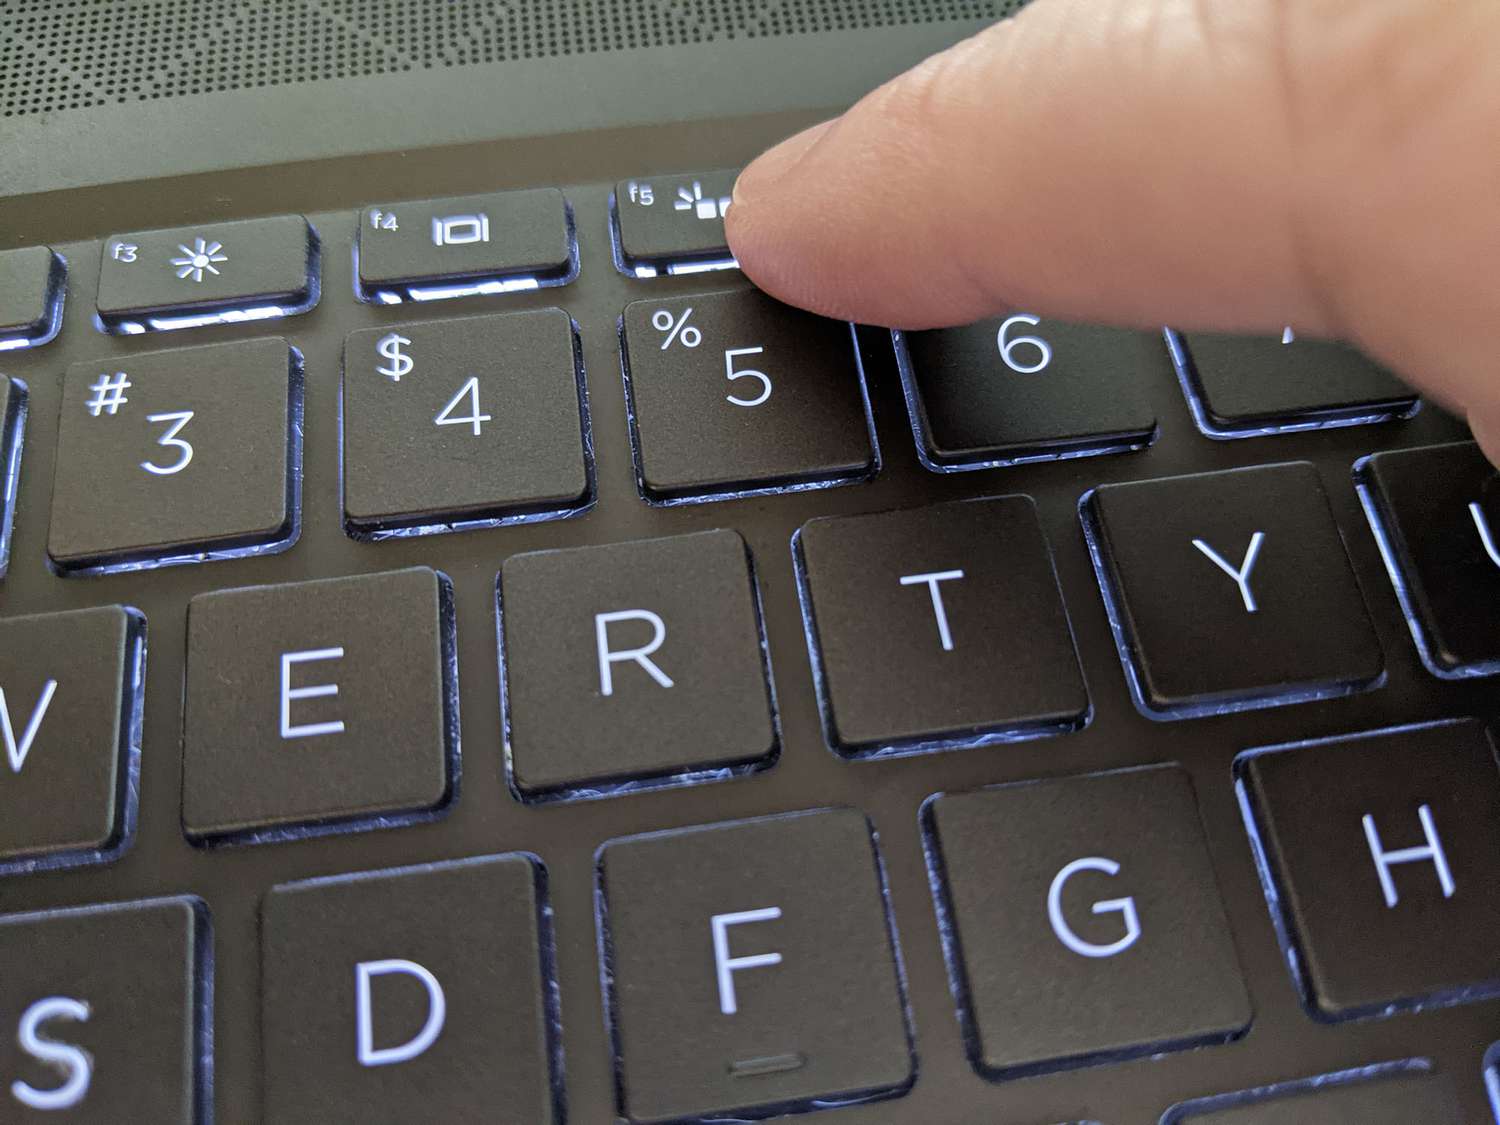 How To Turn On The Lights On My Keyboard